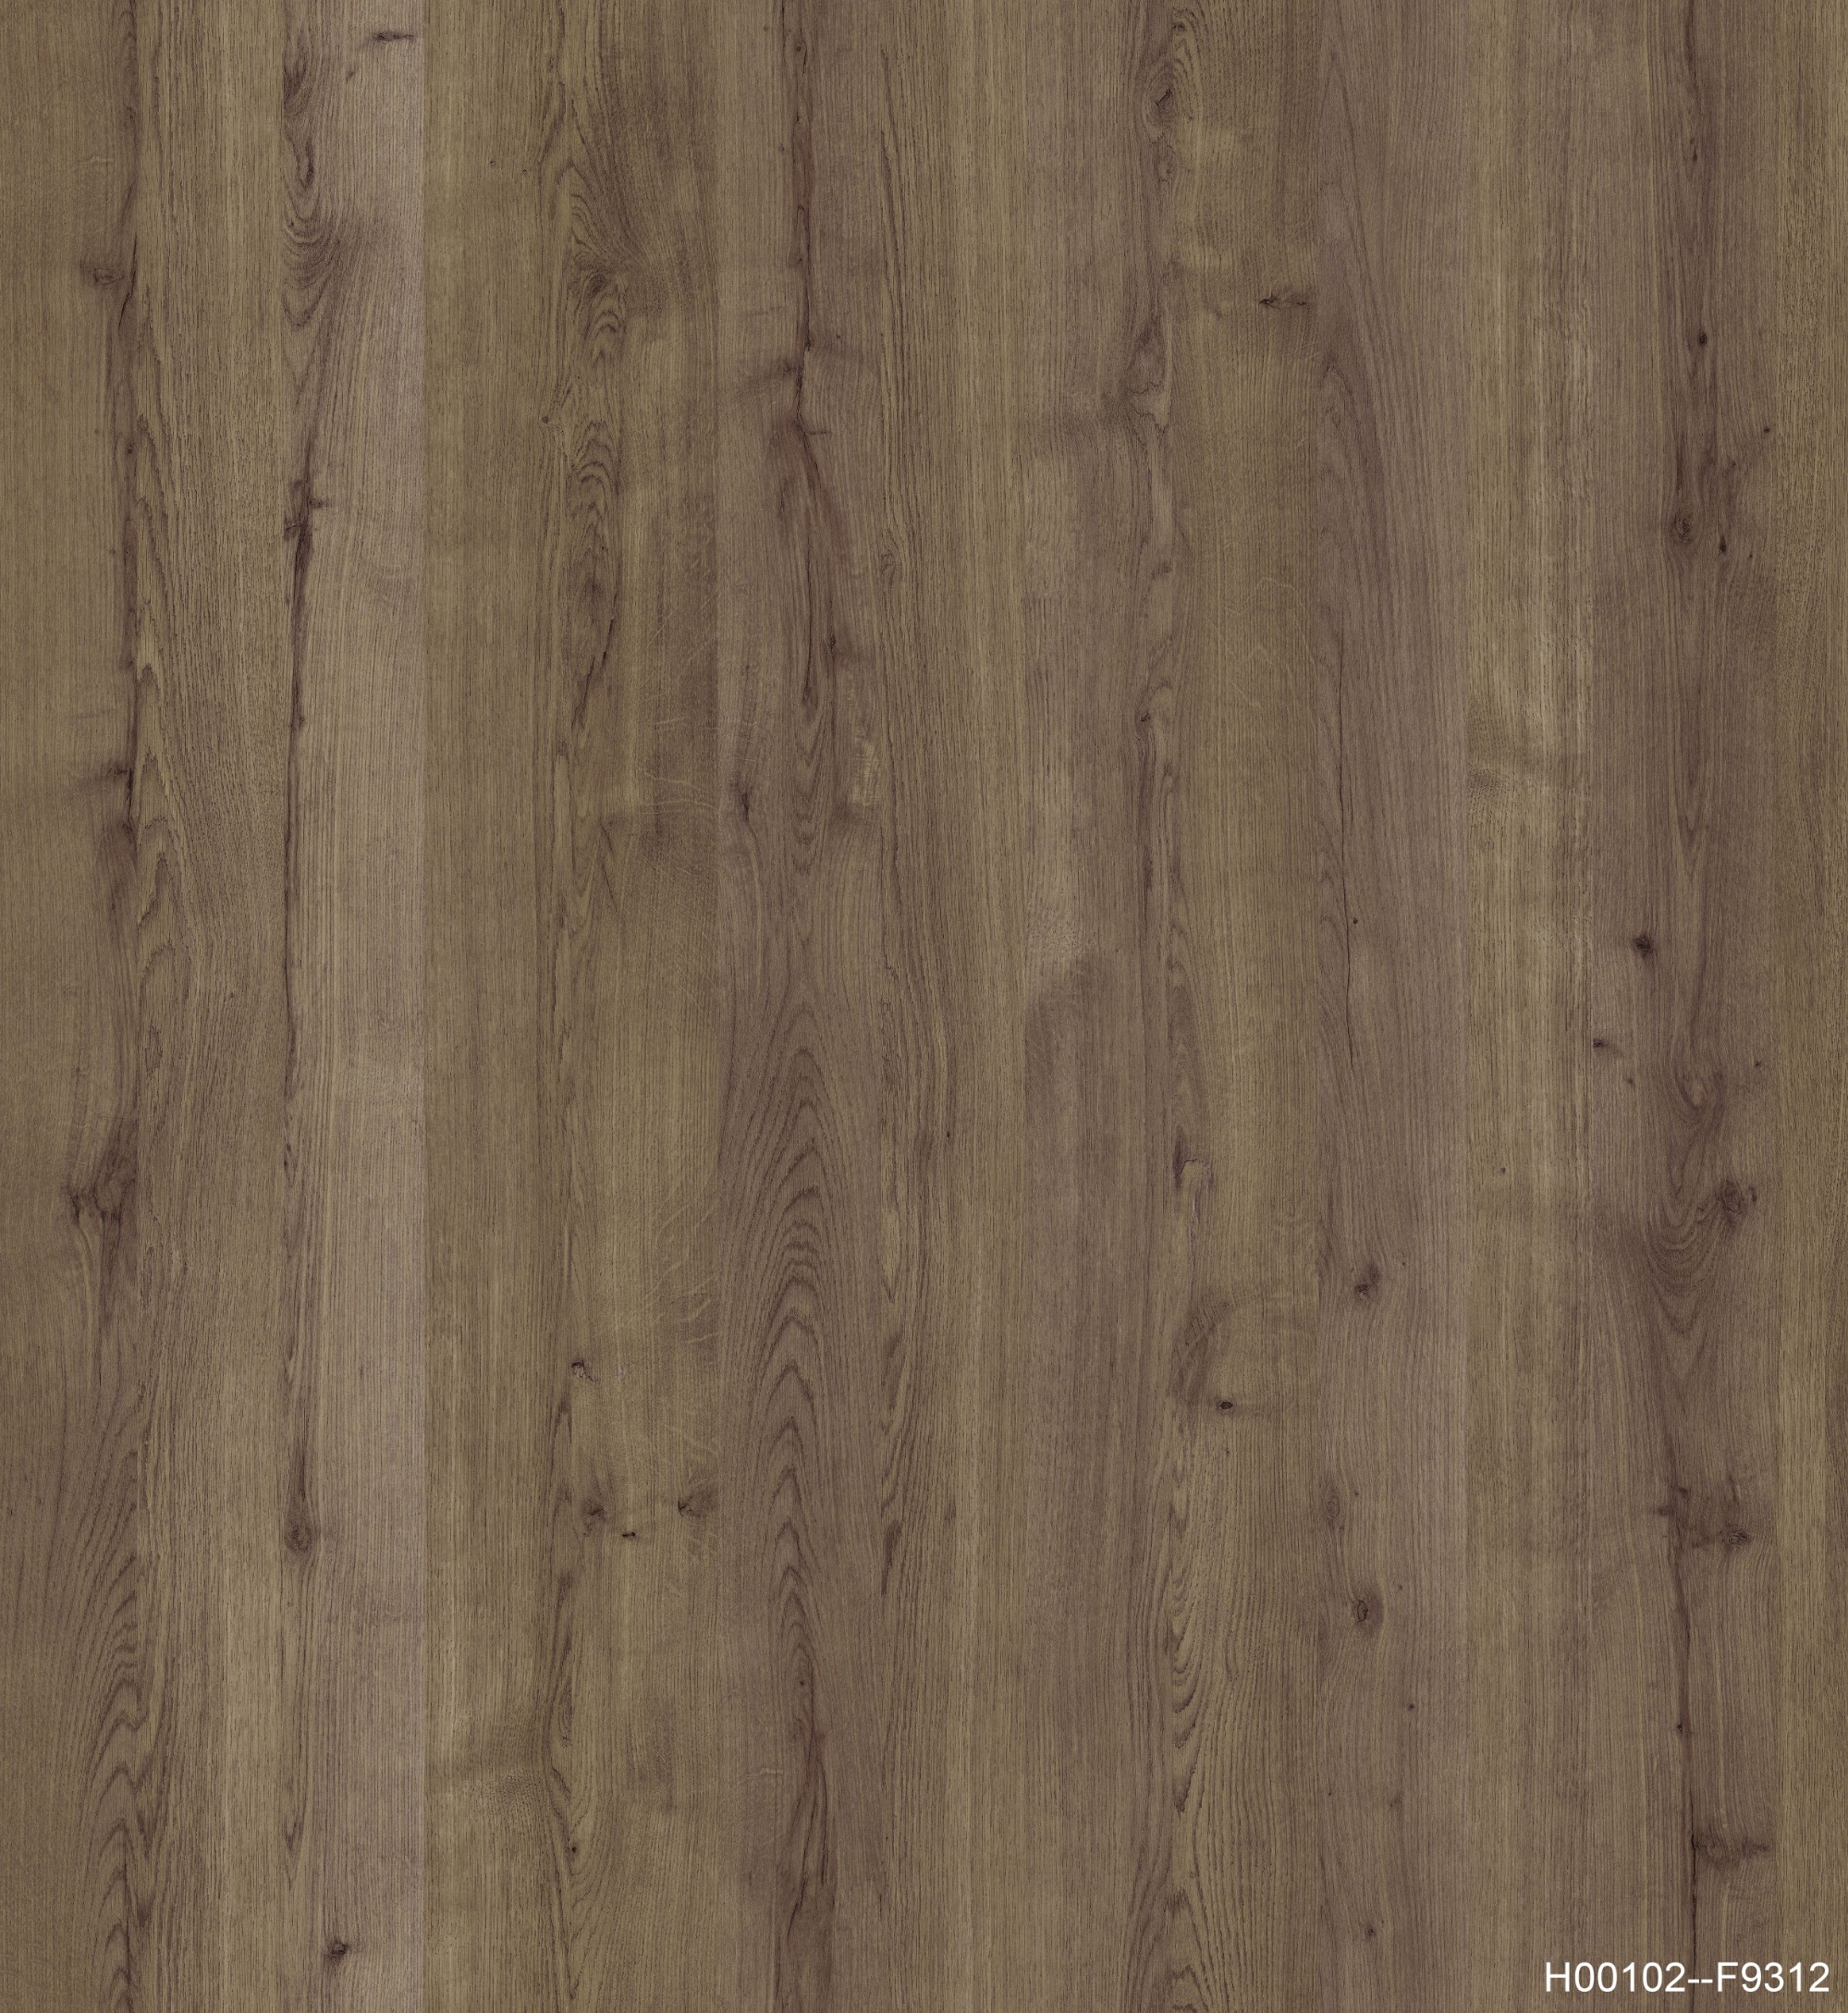 H00102-F9312 Melamine paper with wood grain